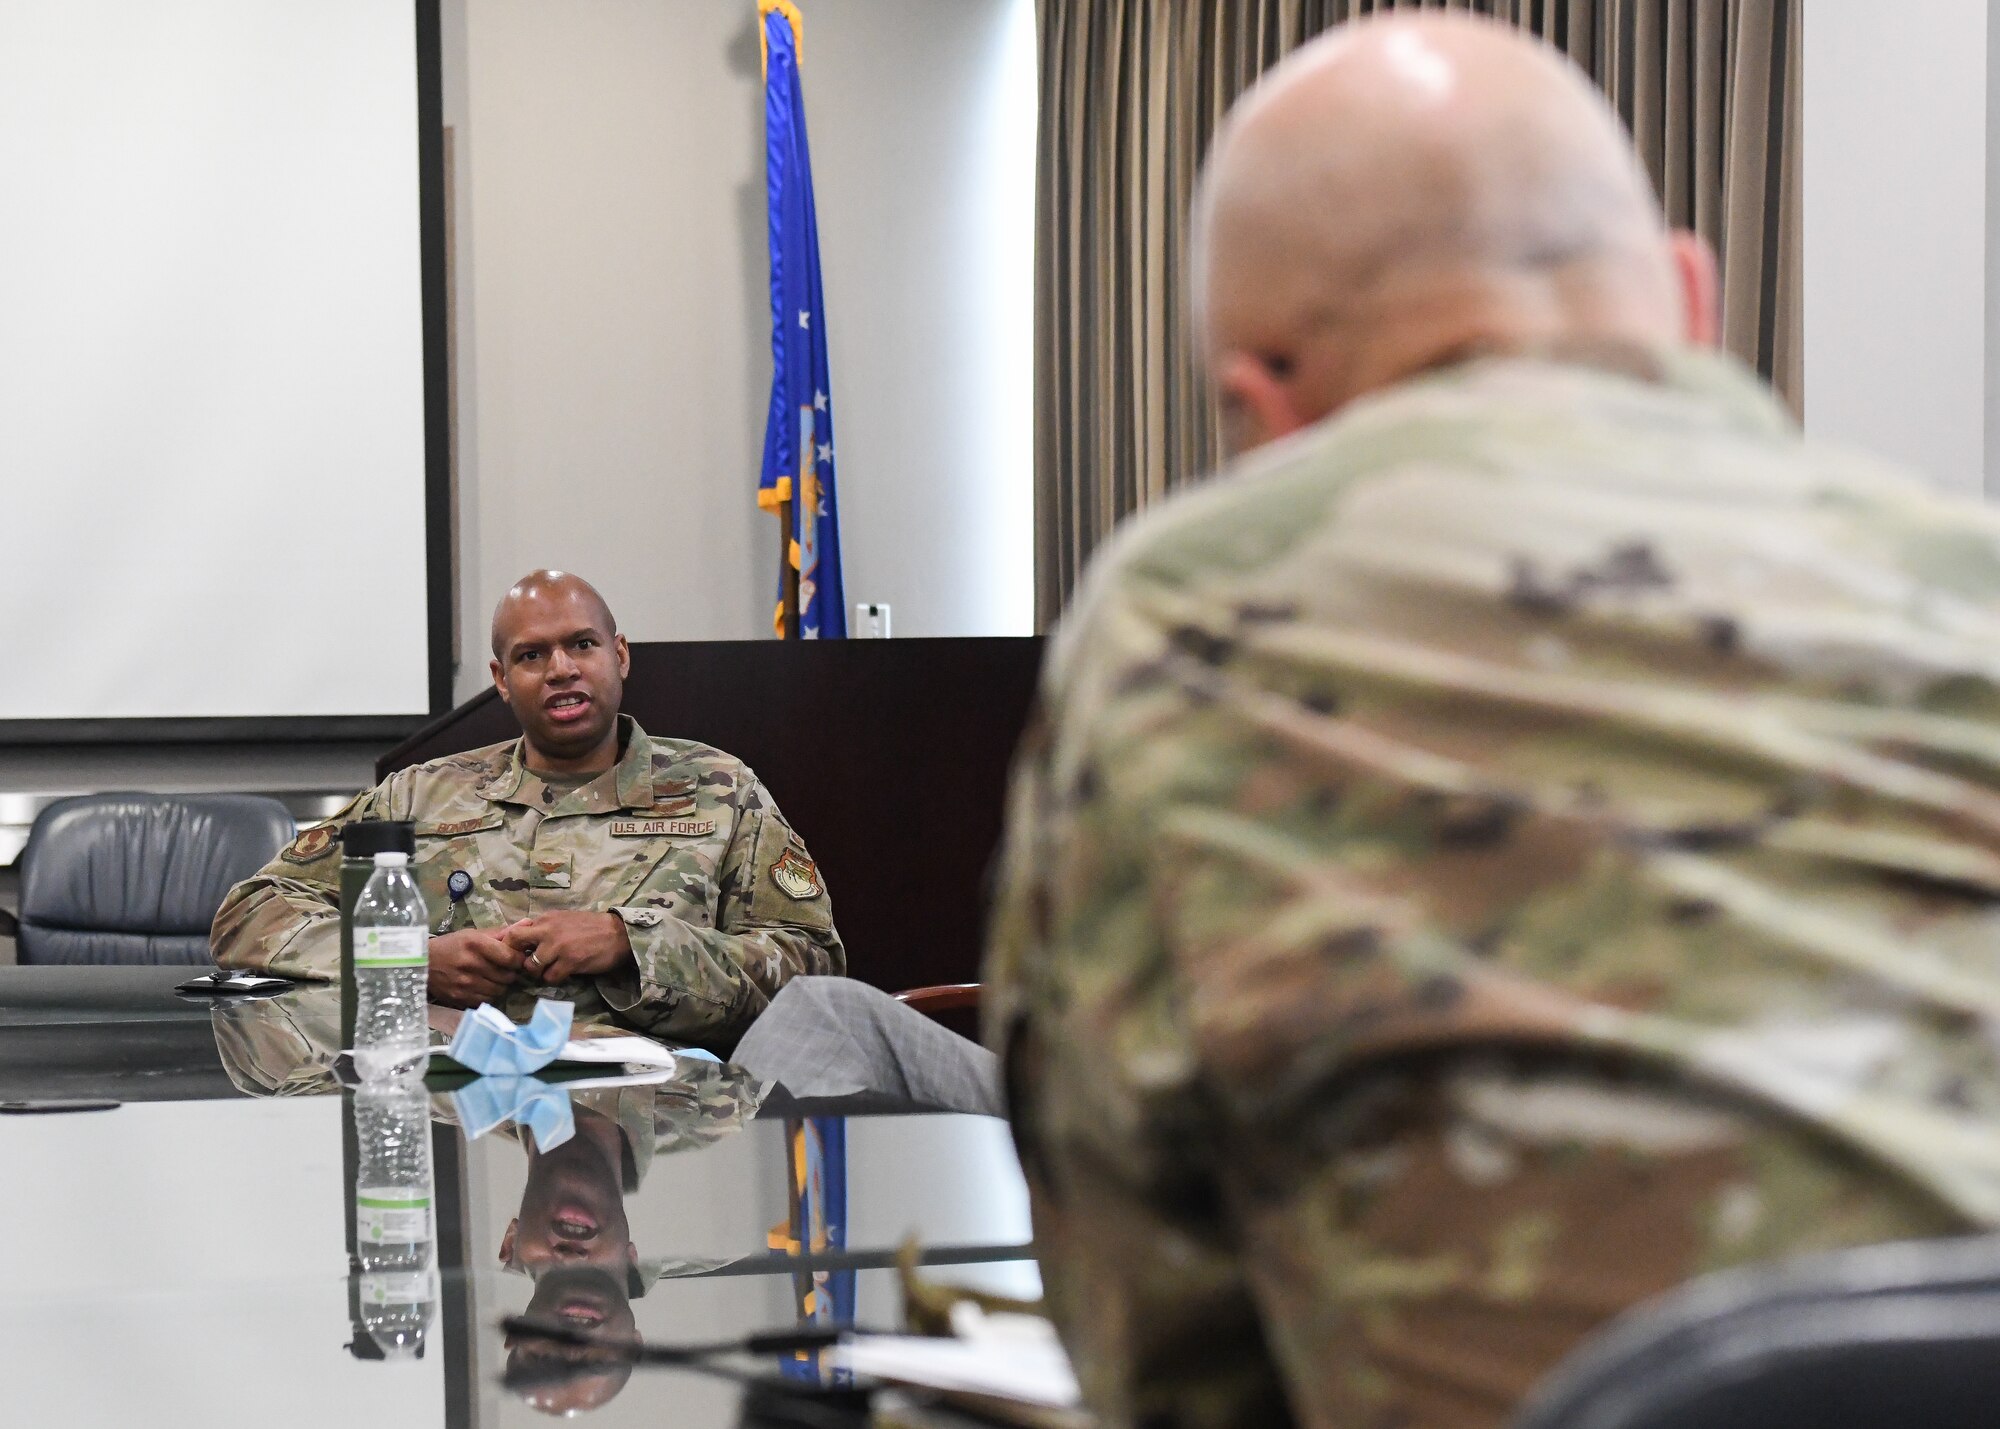 Col. Ernest Lincoln Bonner, chief of the Arnold Engineering Development Complex (AEDC) Test Division, offers his thoughts to Gen. Arnold W. Bunch Jr., commander, Air Force Materiel Command, during a discussion on diversity and inclusion held by Bunch with AEDC senior leadership, July 8, 2020, at Arnold Air Force Base, Tenn., headquarters of AEDC. Bunch also held a discussion with members of Team AEDC, including uniformed Airmen, DOD civilians and contractors. (U.S. Air Force photo by Jill Pickett)